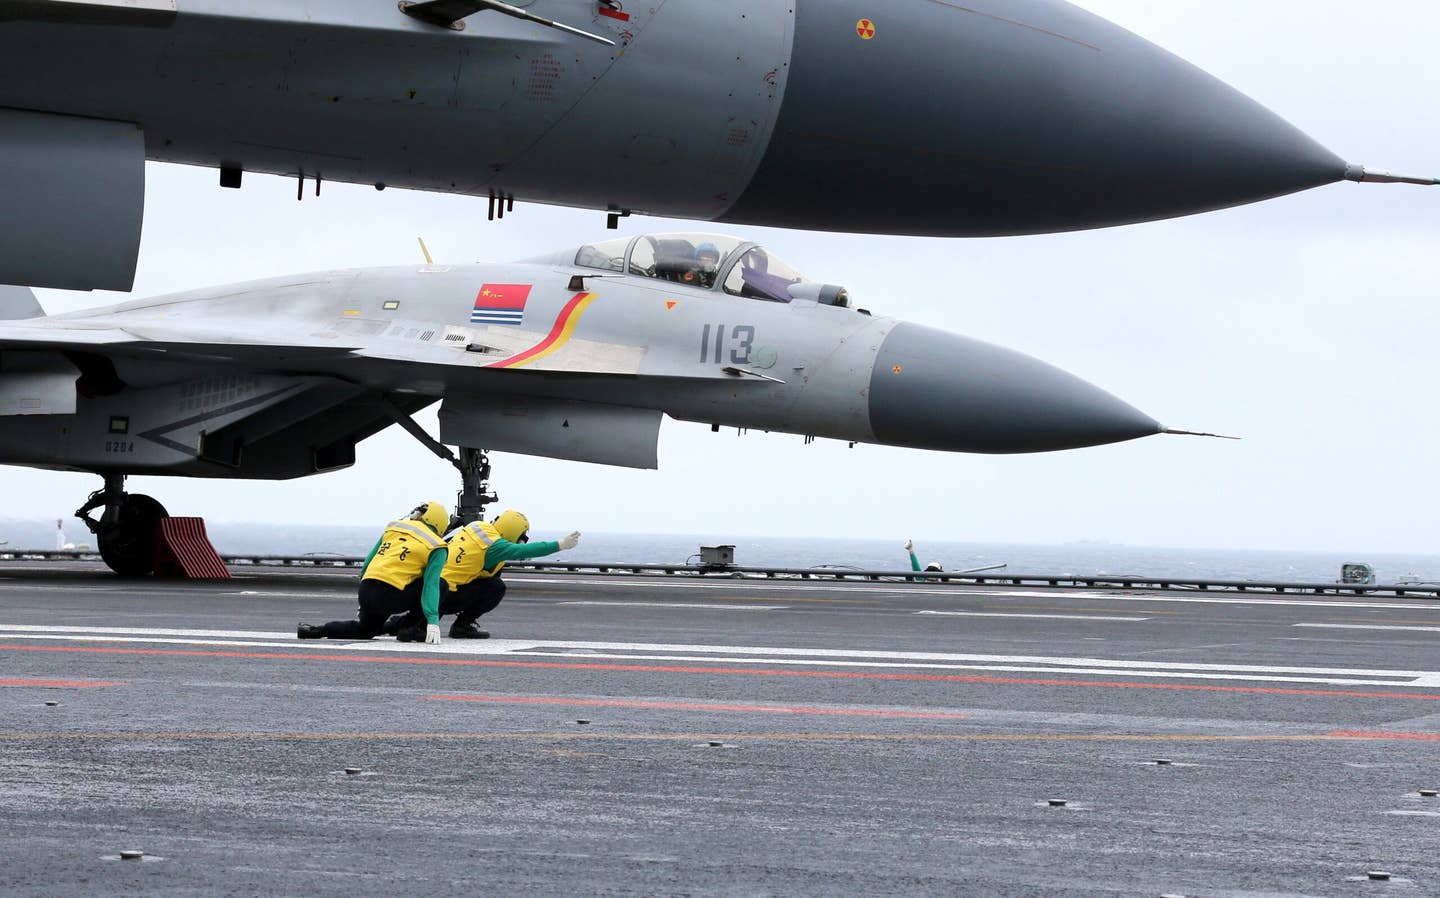 A J-15 prepares to launch off the deck of the aircraft carrier <em>Liaoning</em> during military drills in the South China Sea. <em>STR/AFP via Getty Images</em>